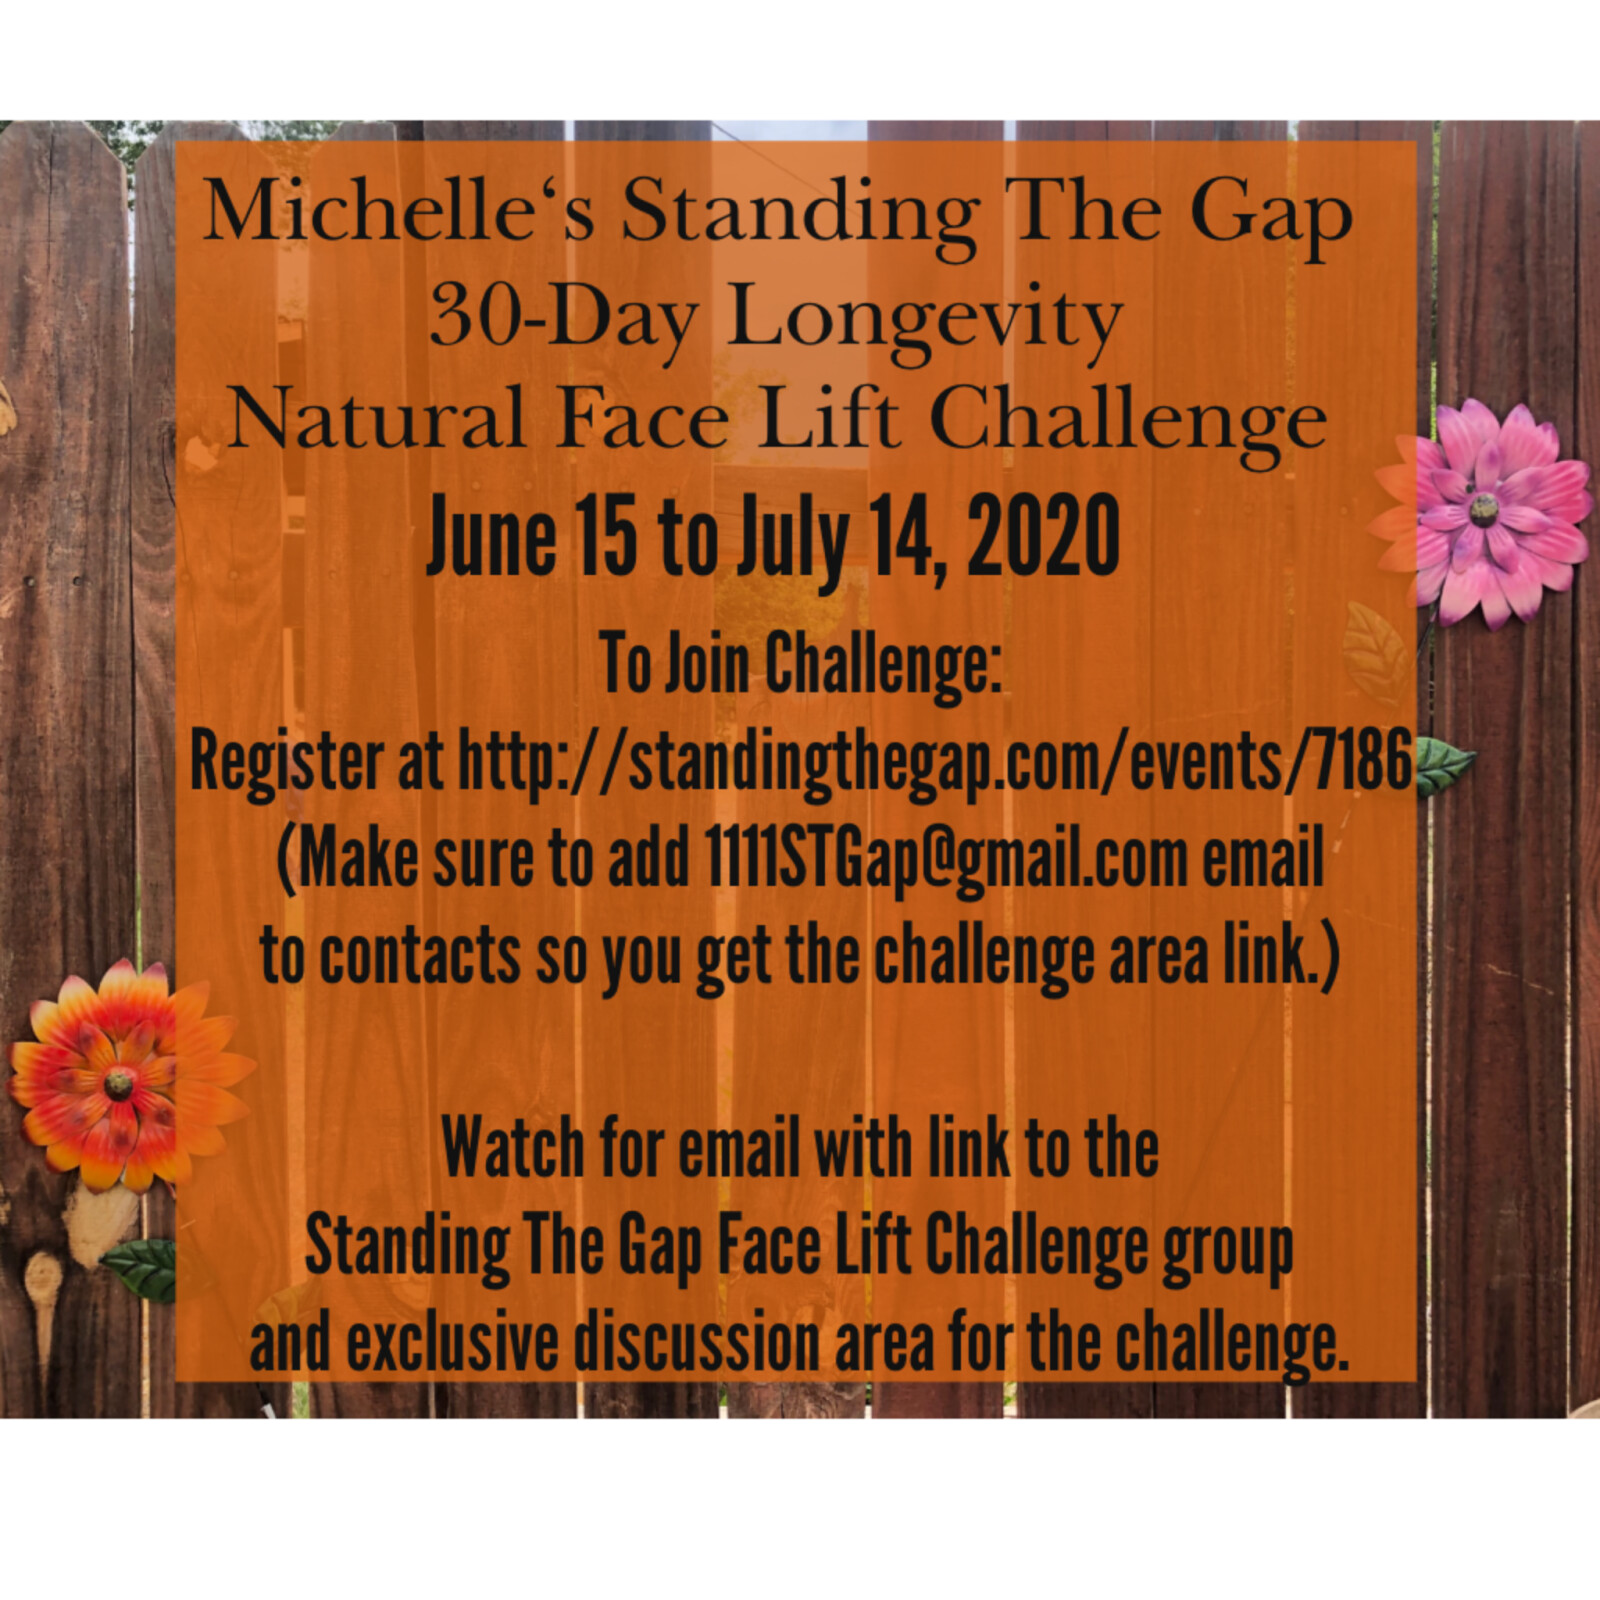 Natural Face Lift Longevity 30-Day Challenge